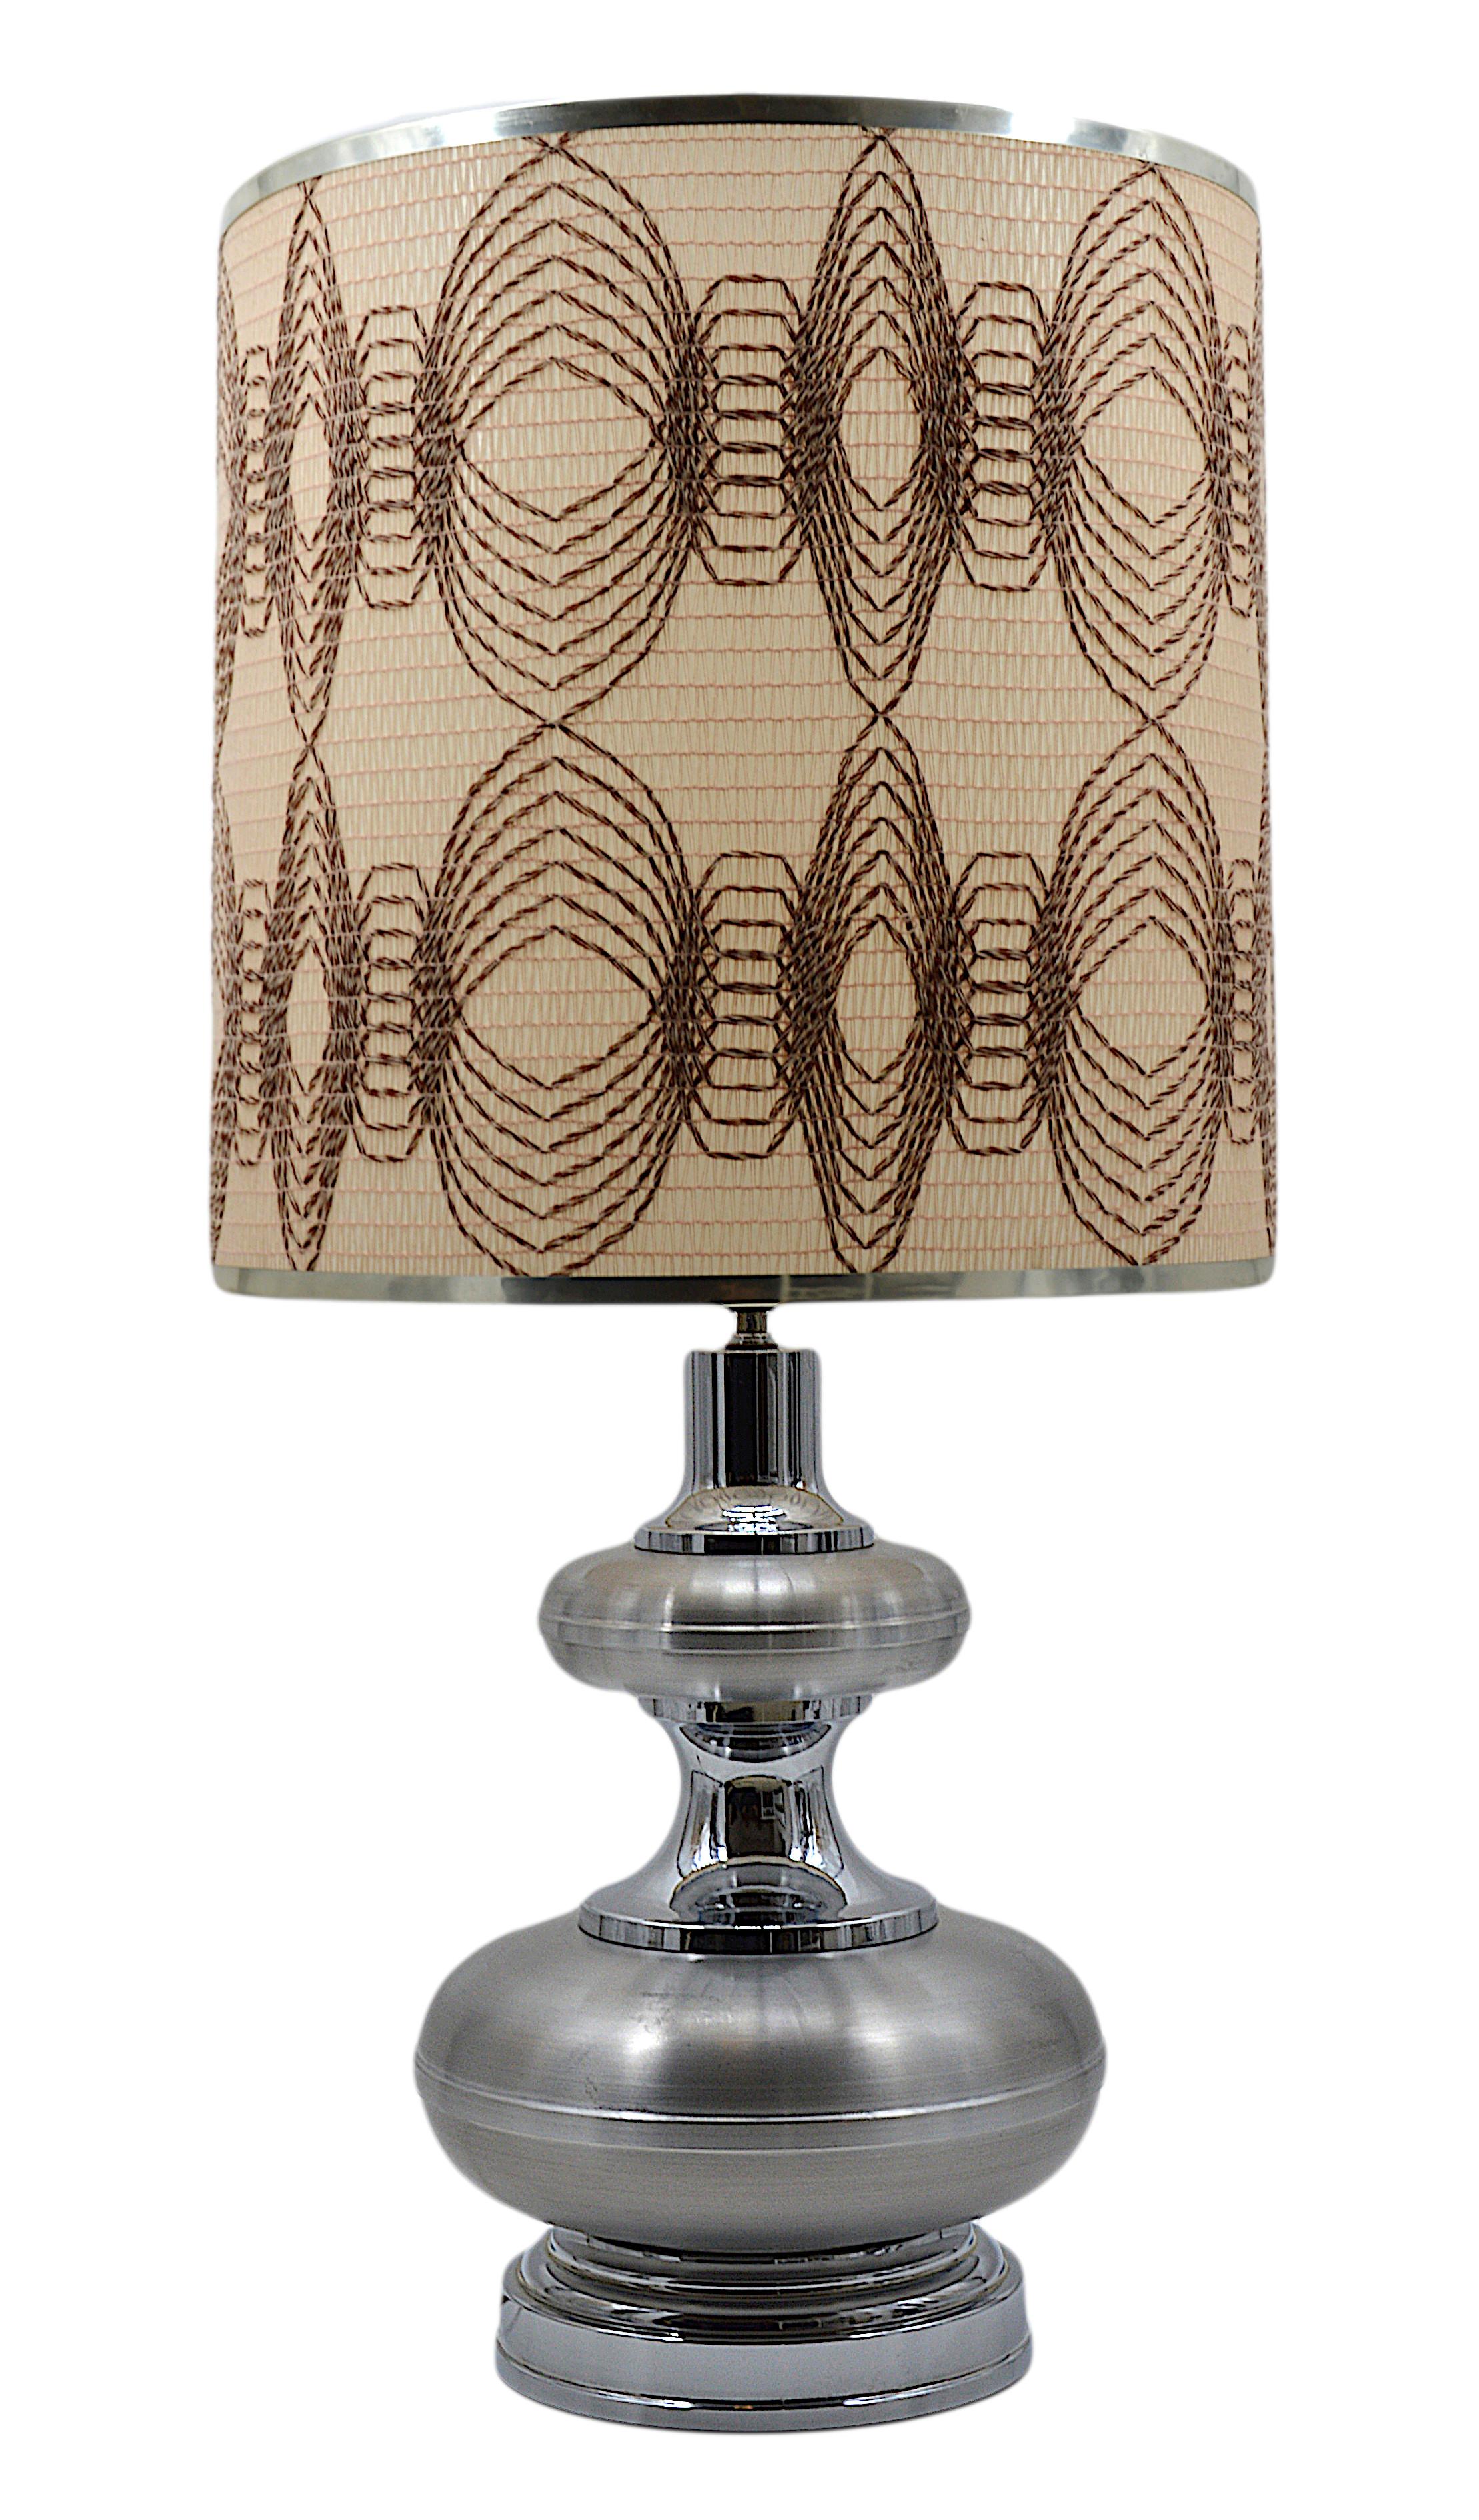 Large mid-century table lamp, France, 1960s. Chrome metal, brushed aluminium and fabric. Original lampshade. Full height 91cm - 35.8 inches; Full diameter 45cm - 17.7 inches. Condition: very good ! Just some slight traces of age. Delivered wired for